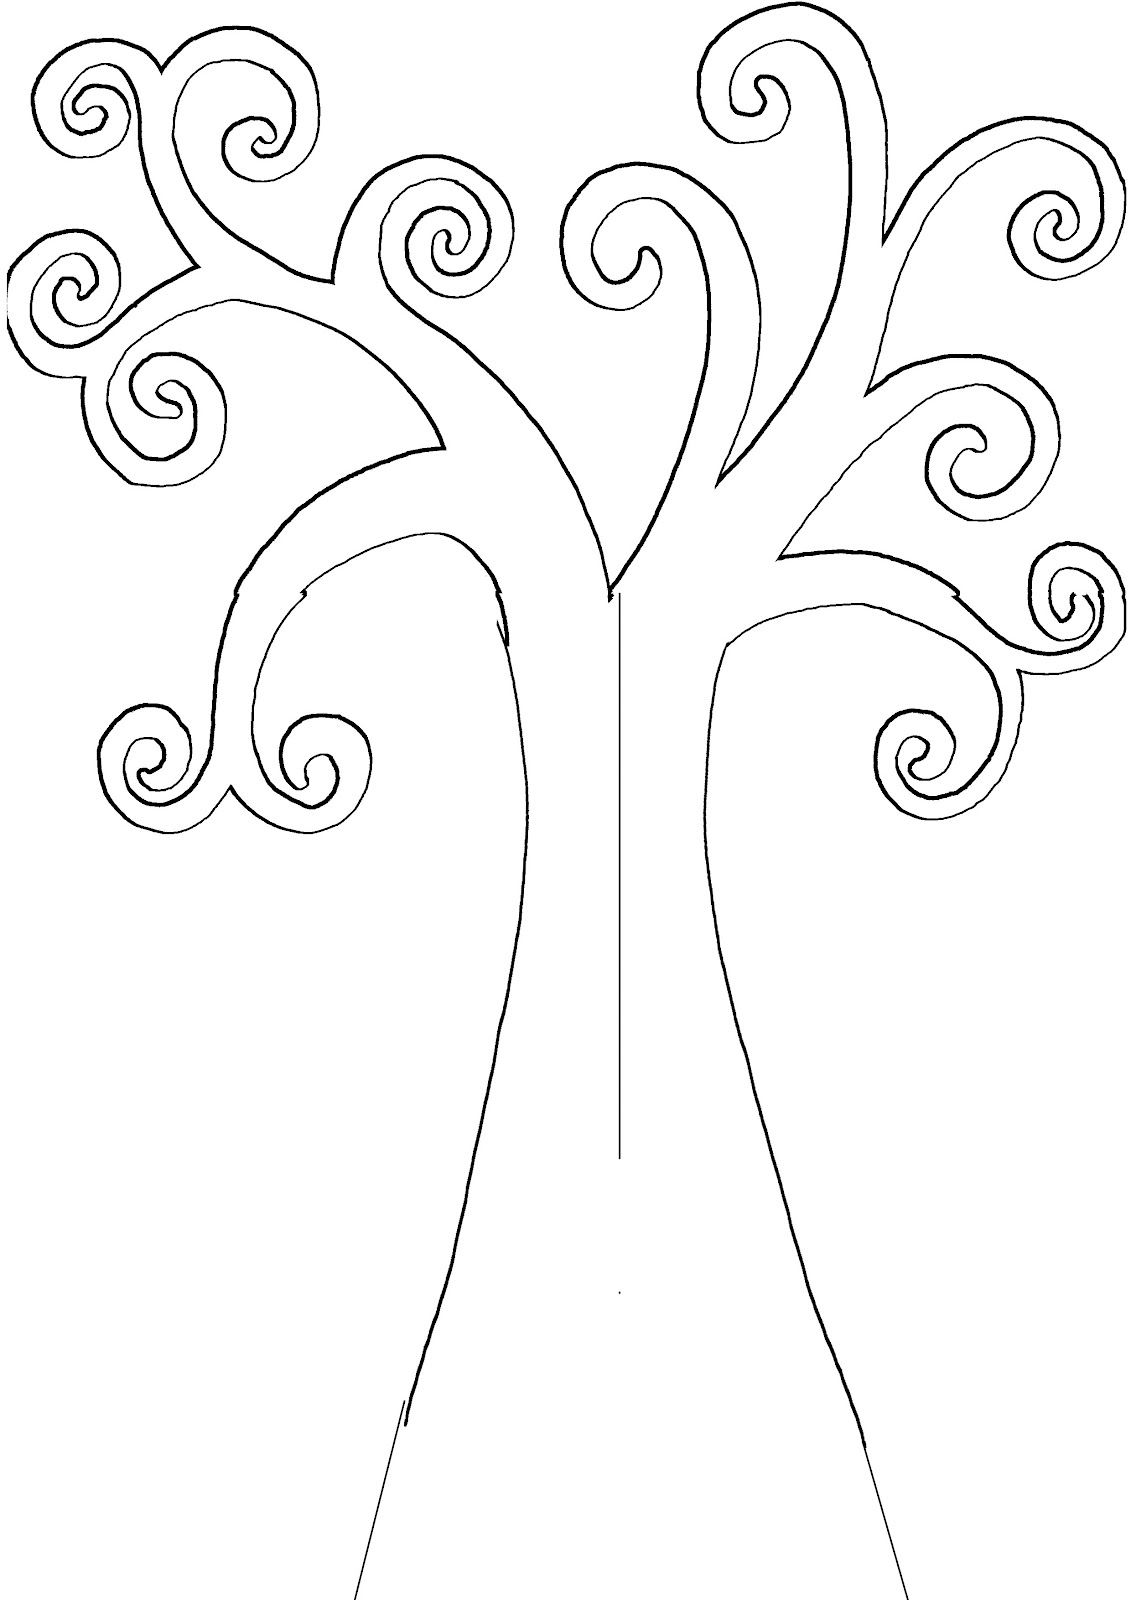 Free Tree Printable Drawing Templates For Adults